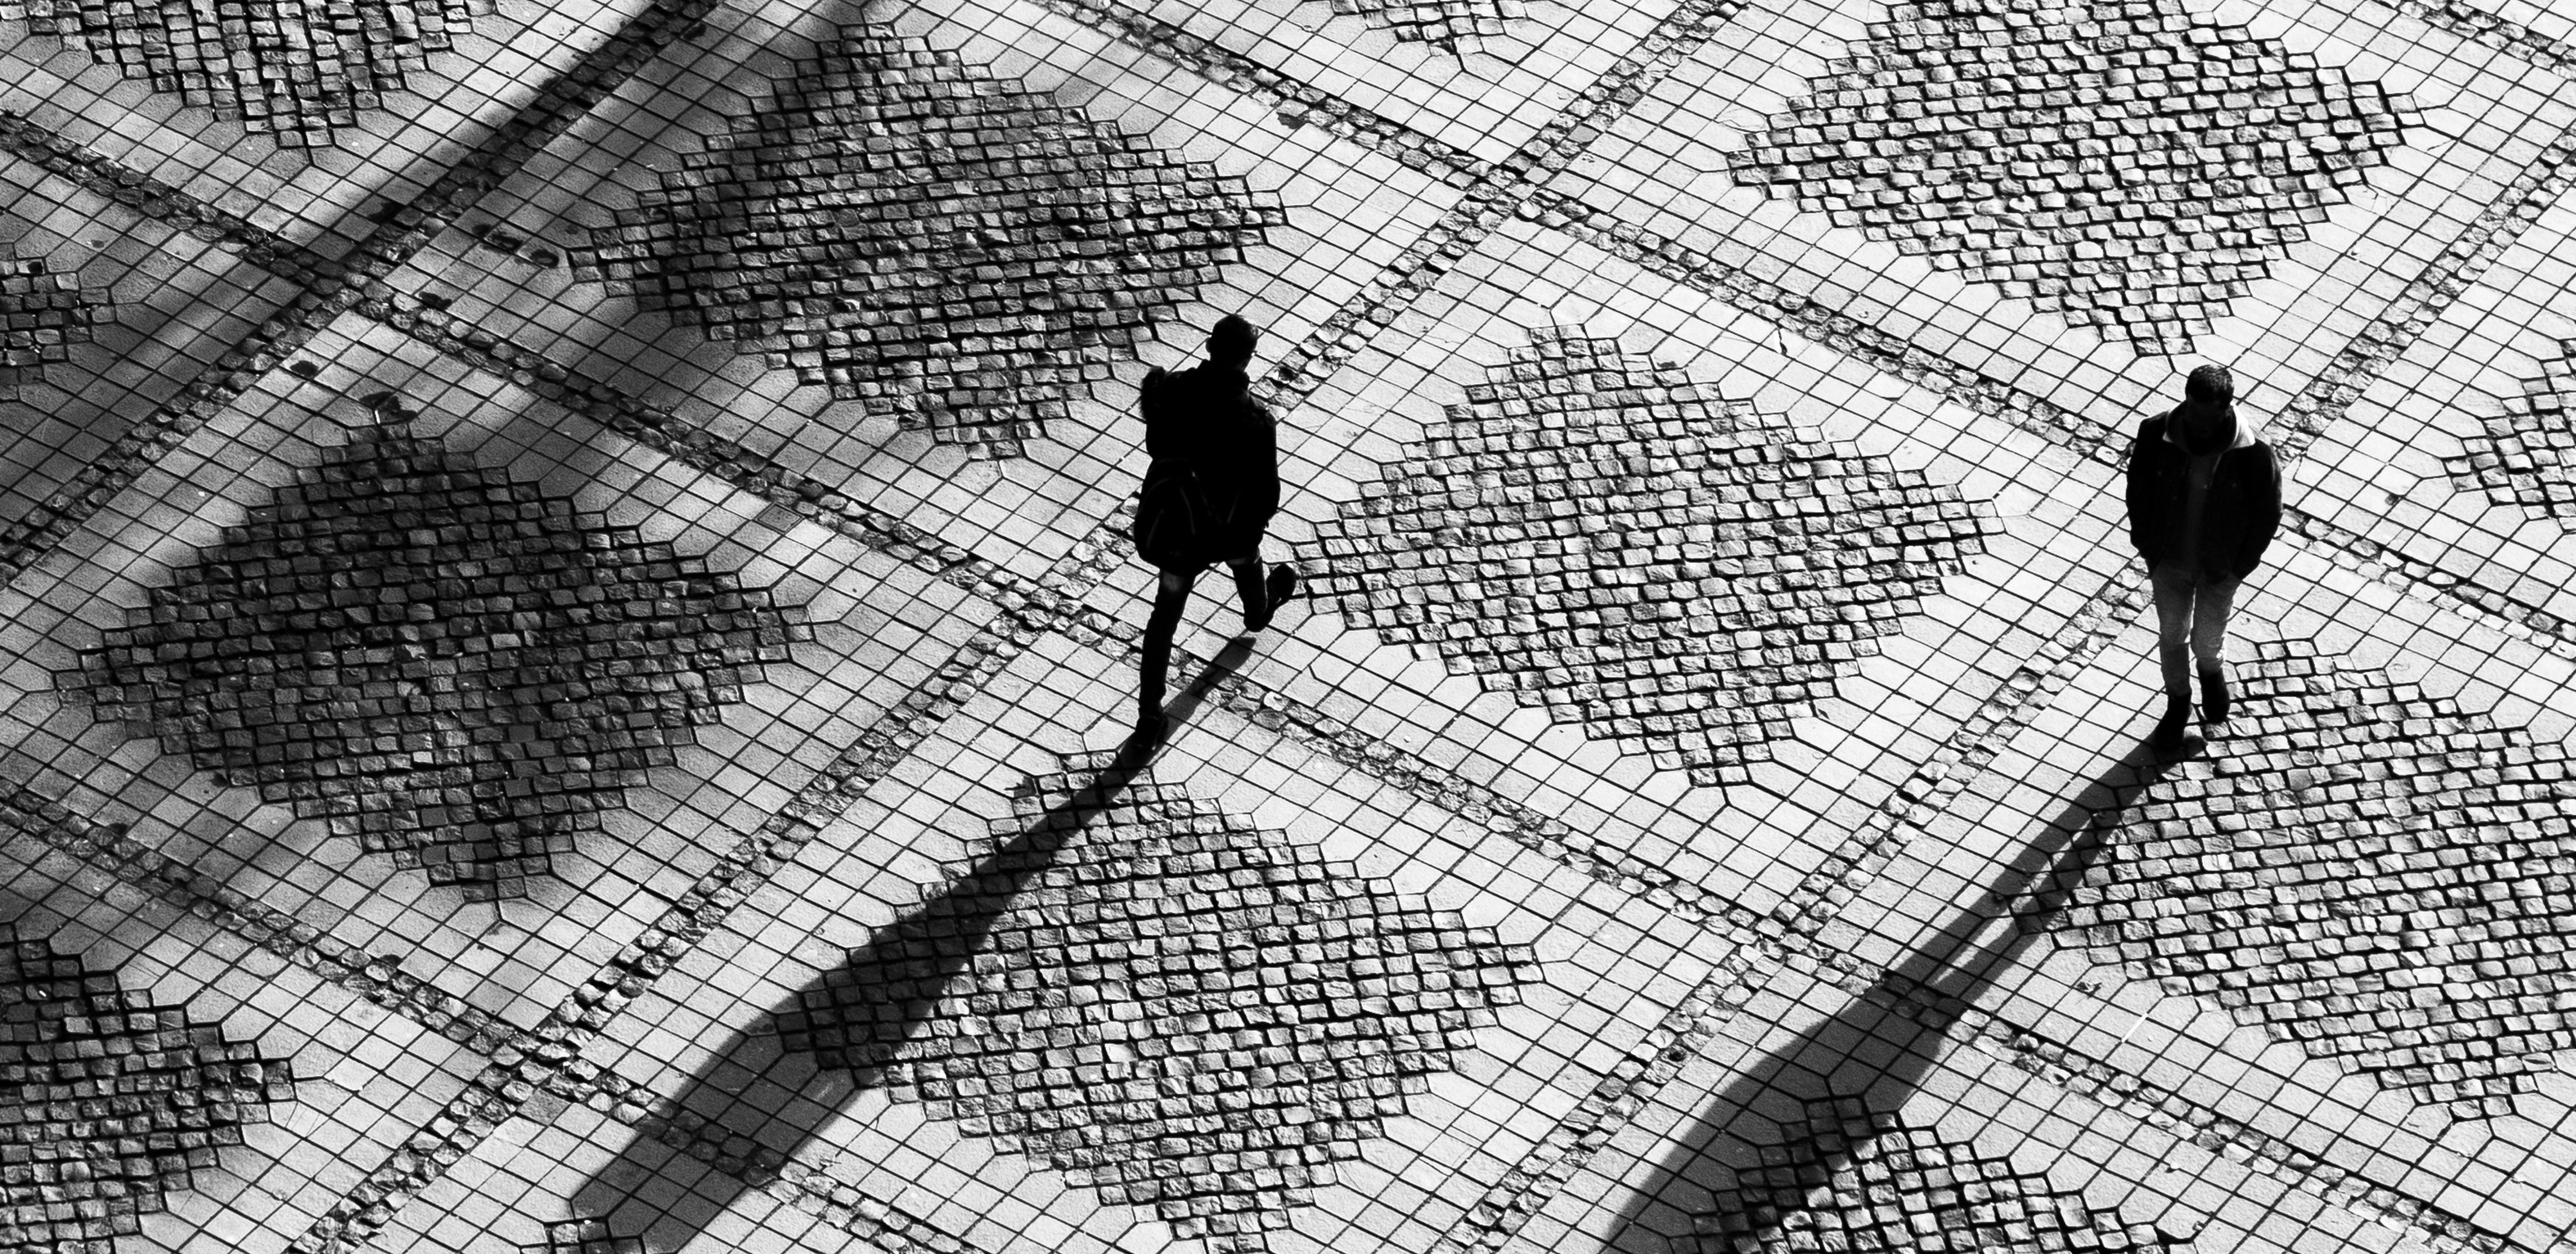 Aerial view of people walking across square, casting long shadows